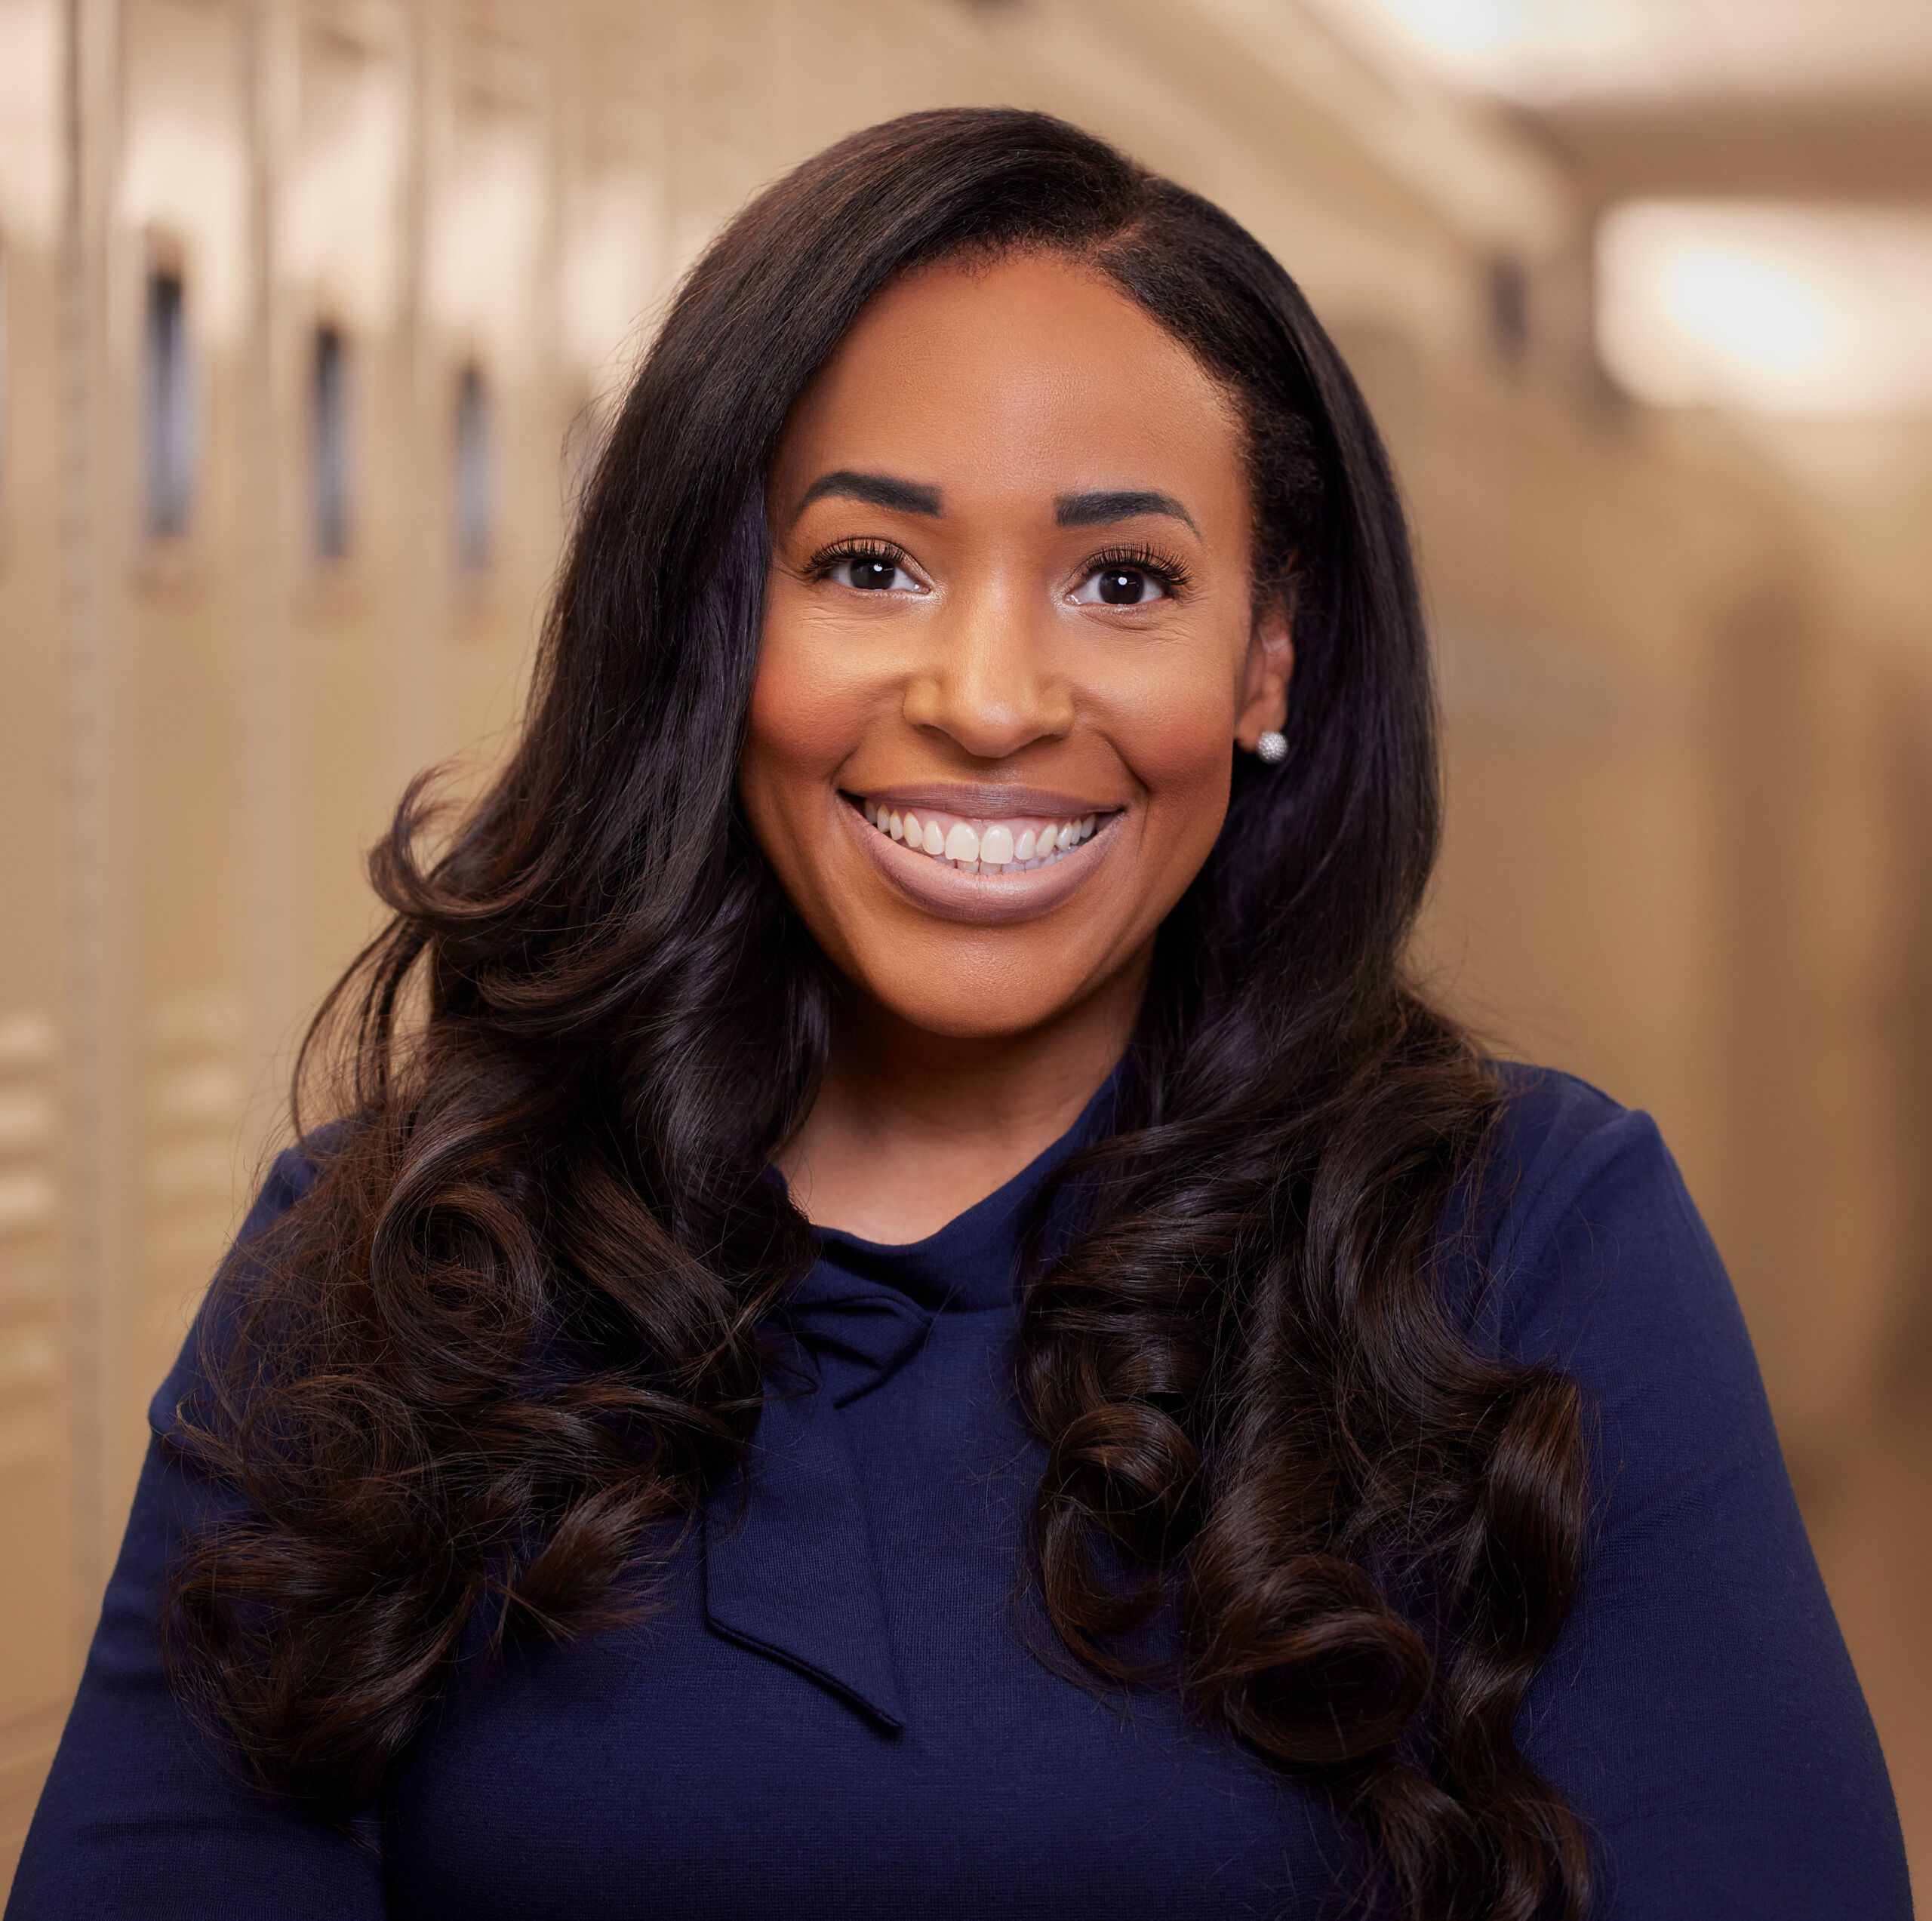 Photo shows a professional headshot of Miracle Moss, principal of Rowe-Clark Math and Science Academy. She is a Black woman with long straight black hair. She is smiling and wearing a dark blue long-sleeved blouse with a bow on the neckline. In the background, you can see lockers in a hallway of Rowe-Clark.